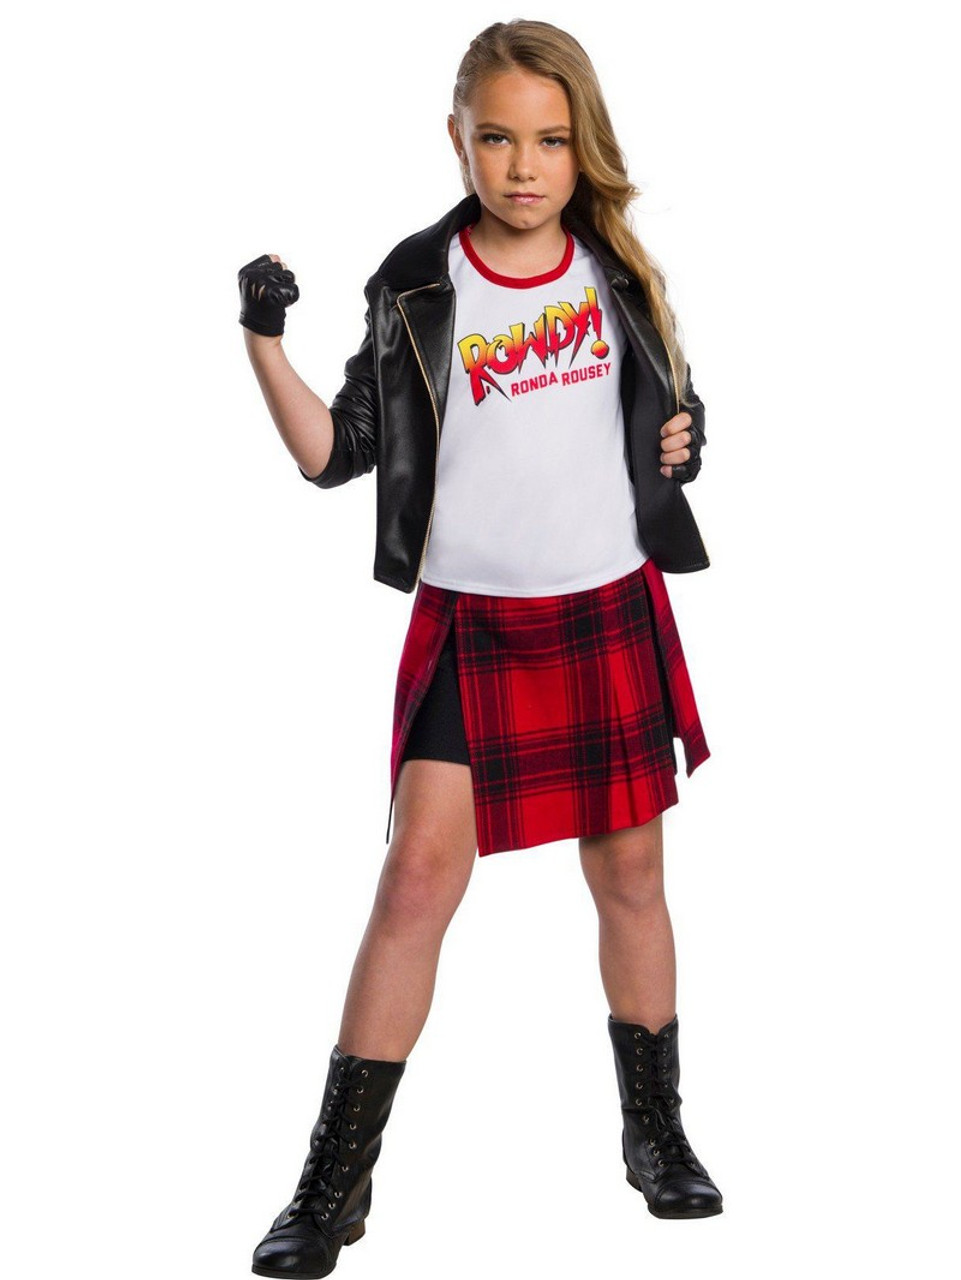 Child WWE Rowdy Ronda Rousey Deluxe Costume